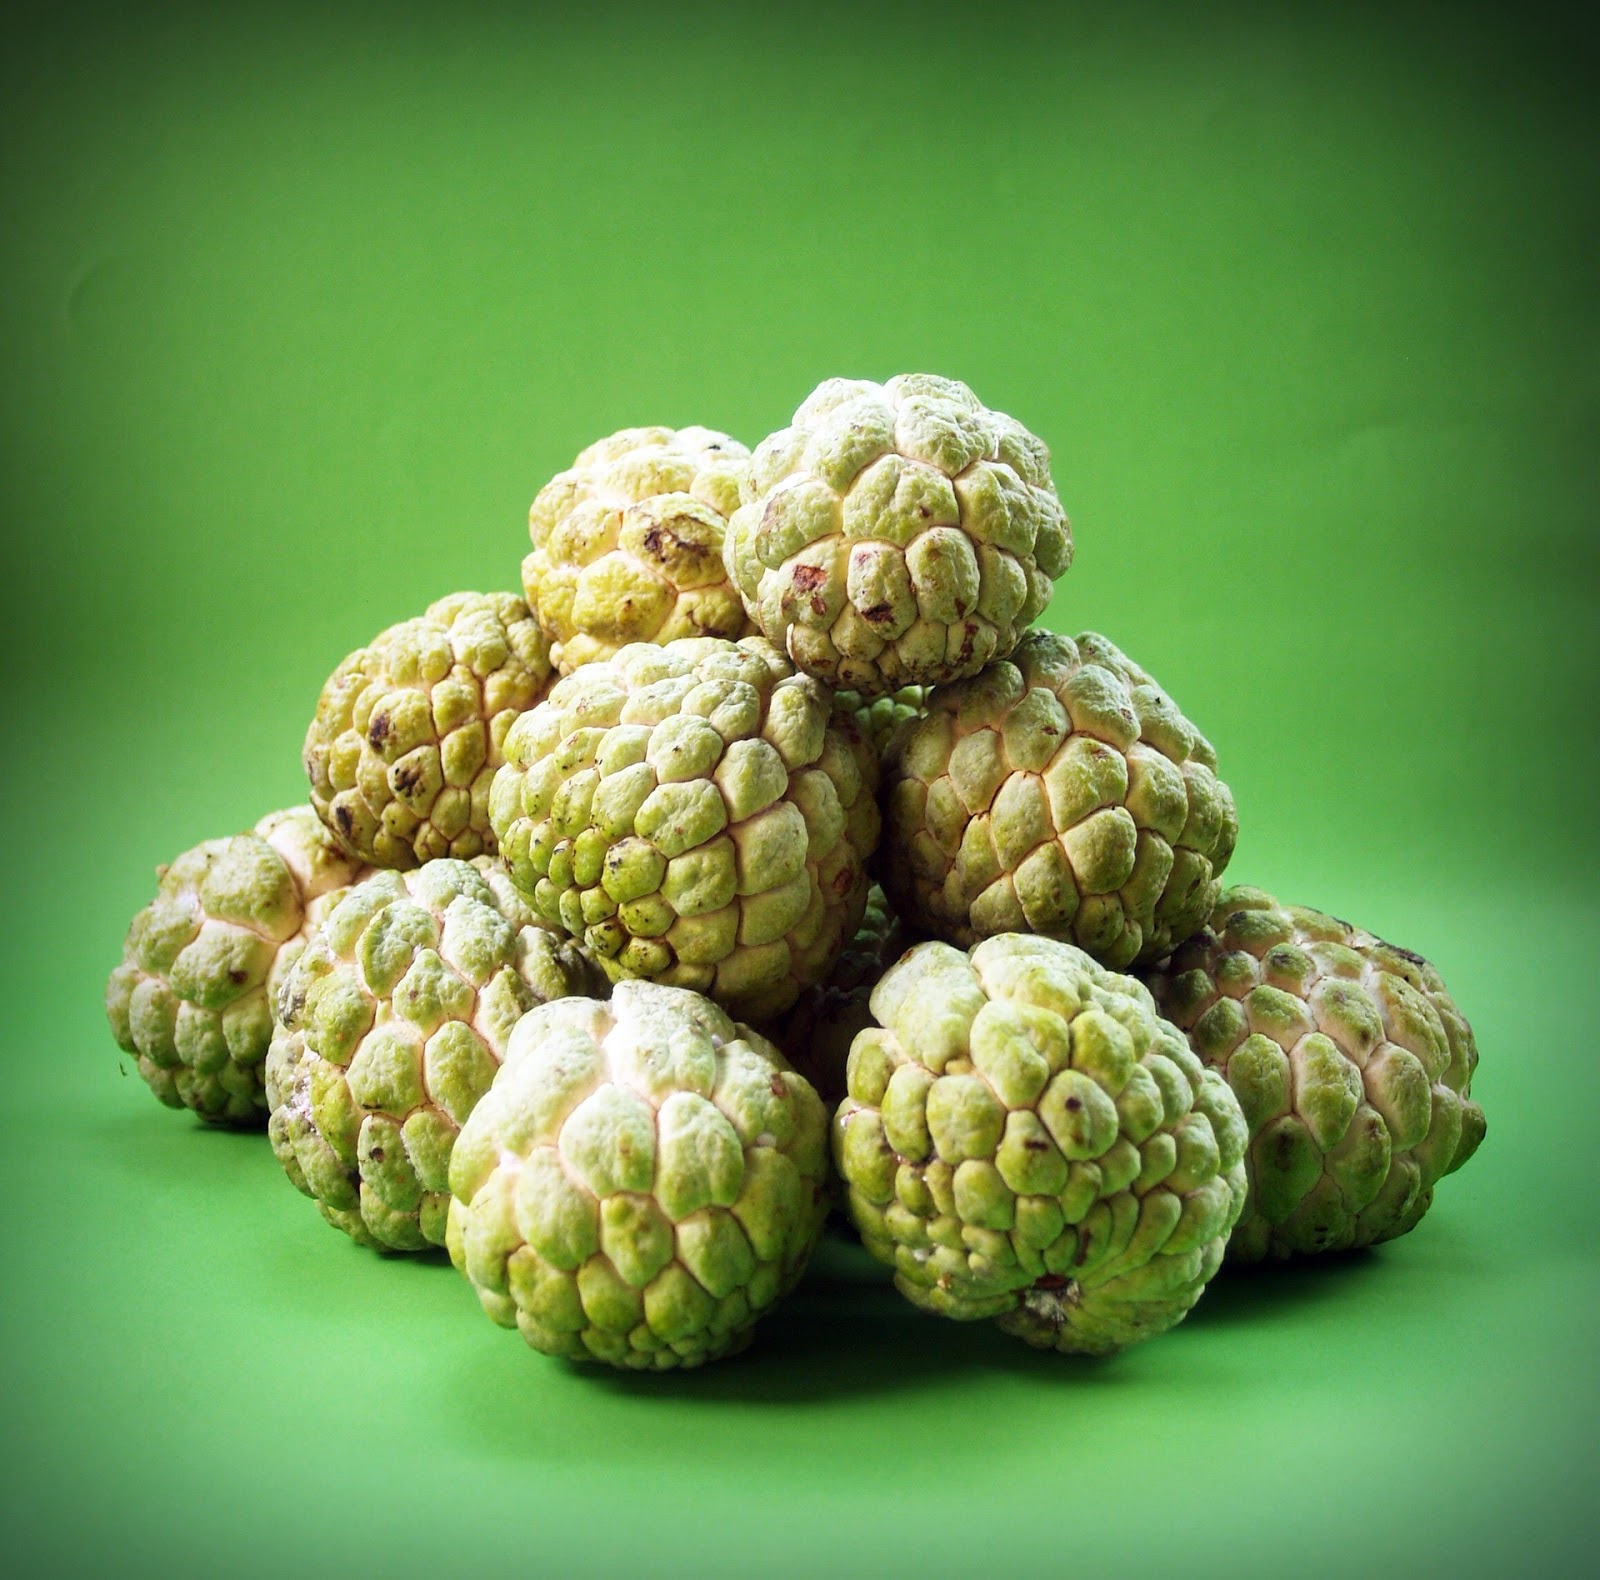 Health Surprising Health Benefits Of Atis Fruit The Sugar Apple Of Your Life